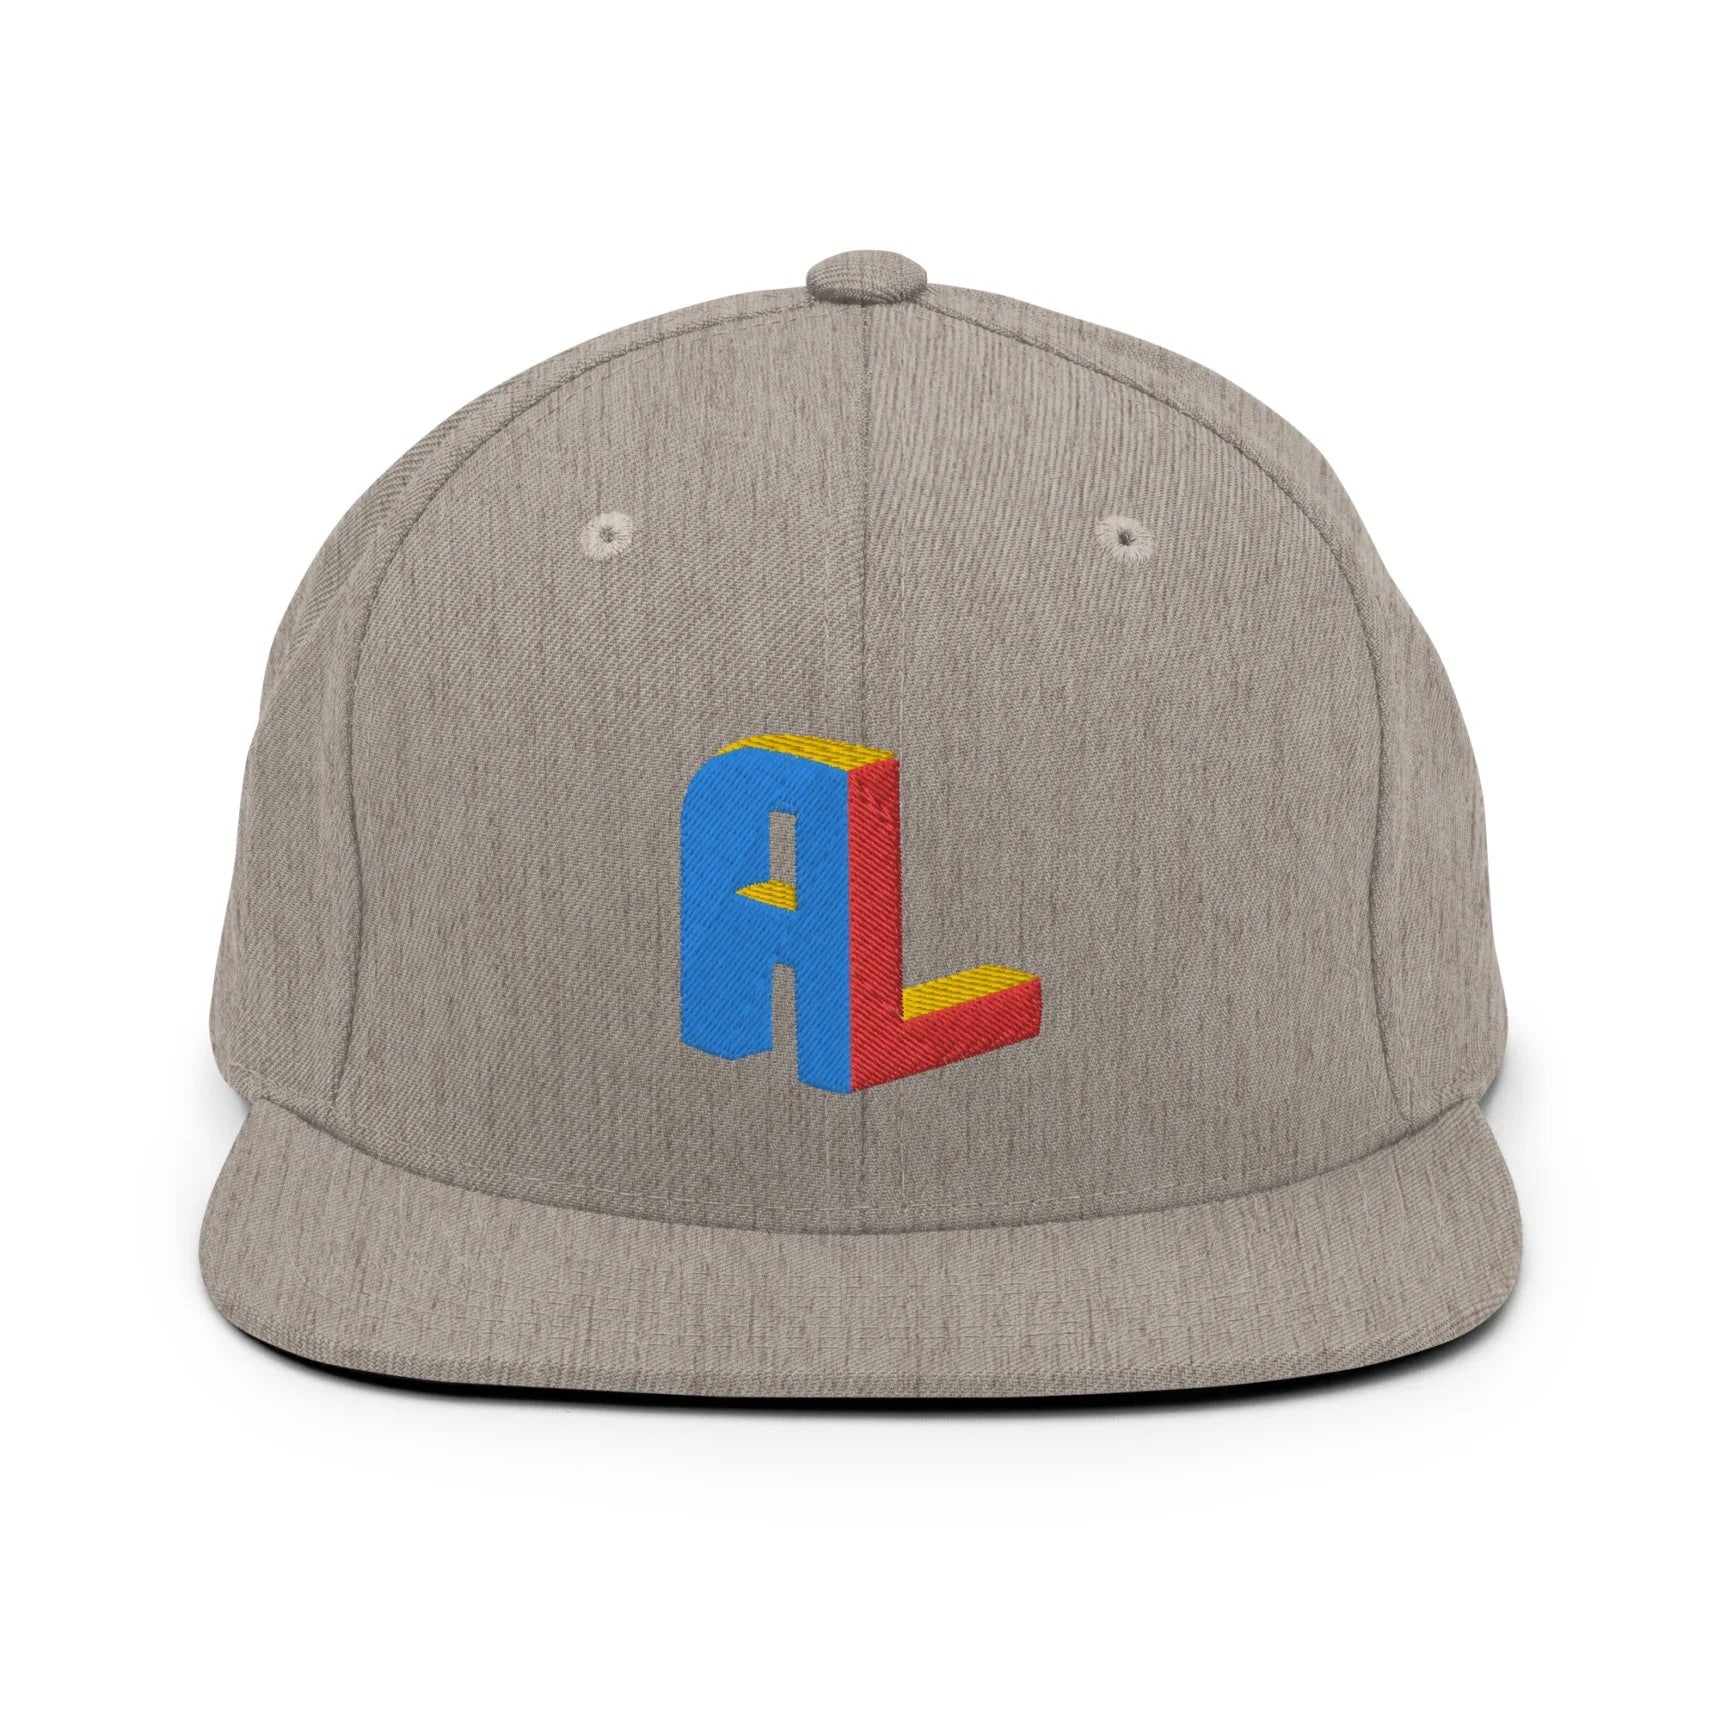 Ance Larmstrong ShowZone snapback hat in heather grey